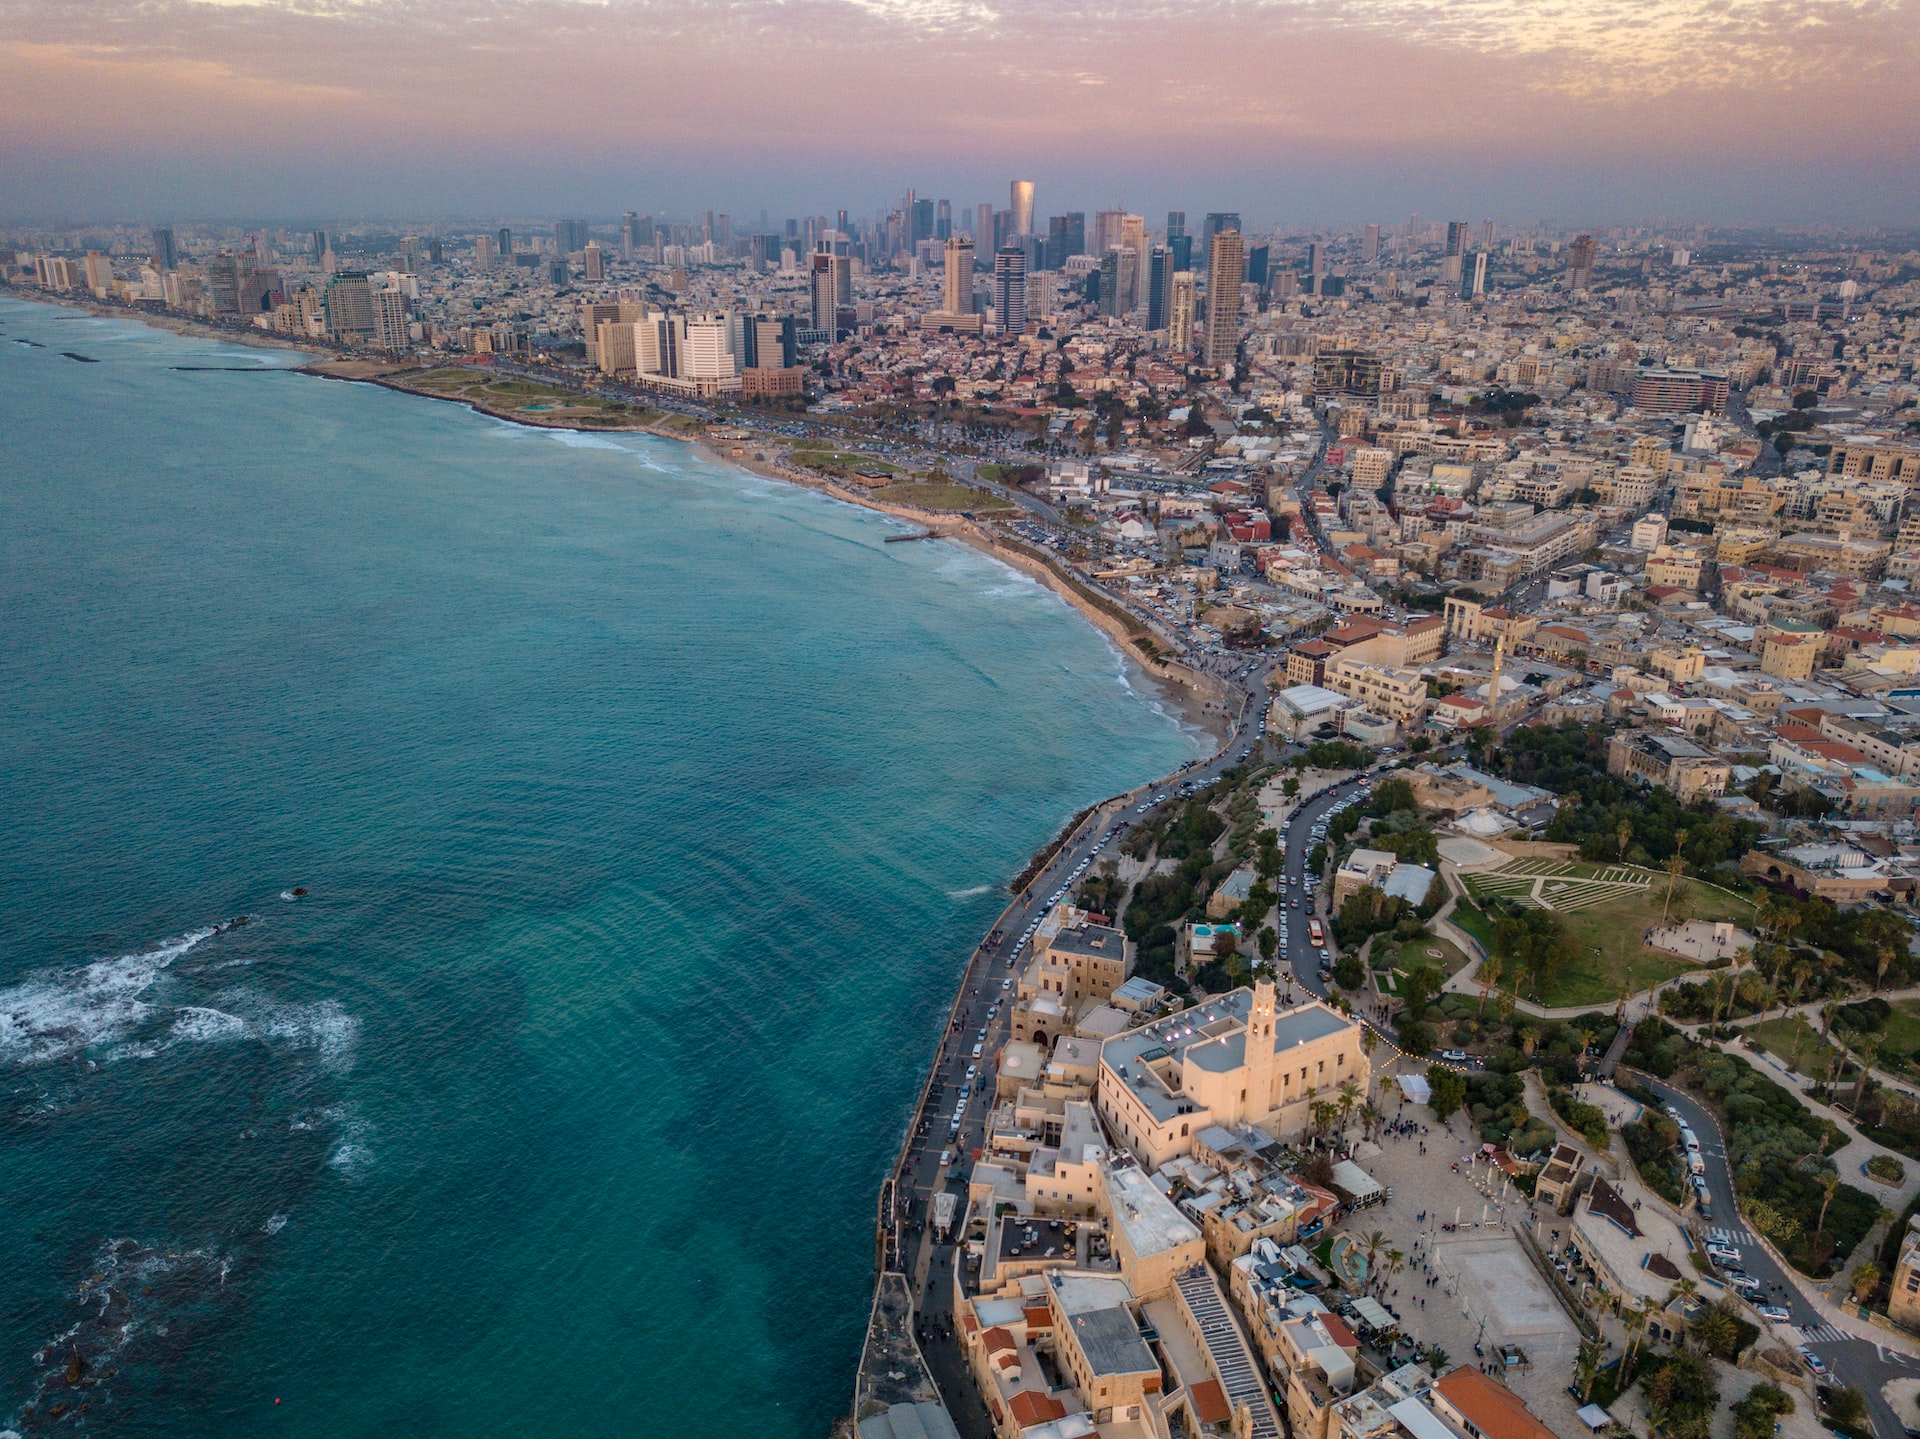 Visiting Israel? Take a Look at These Tips